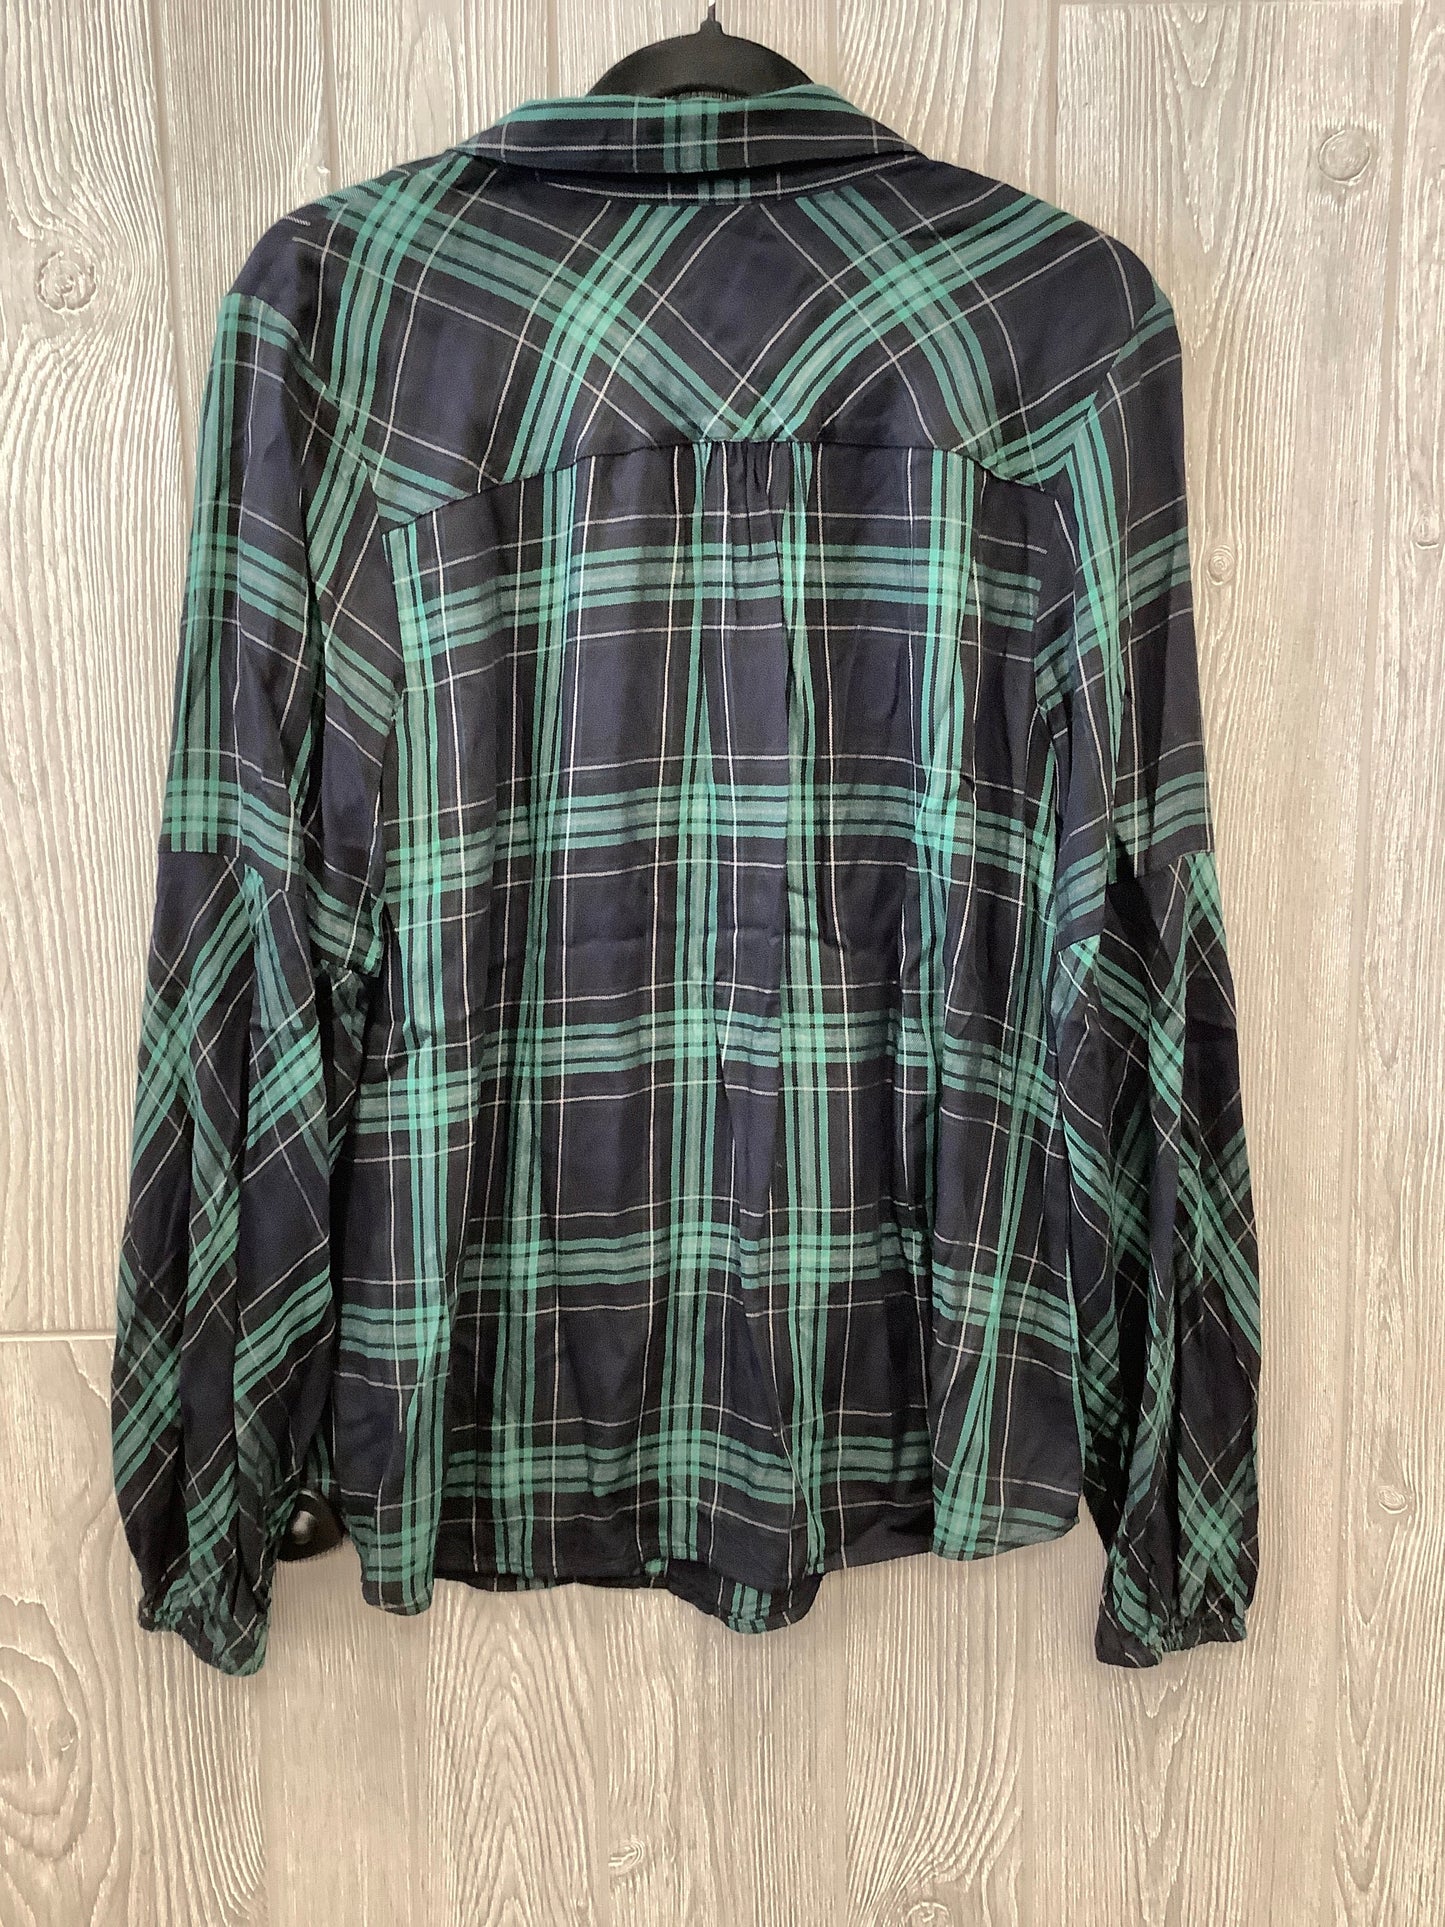 Blue & Green Top Long Sleeve Cabi, Size L